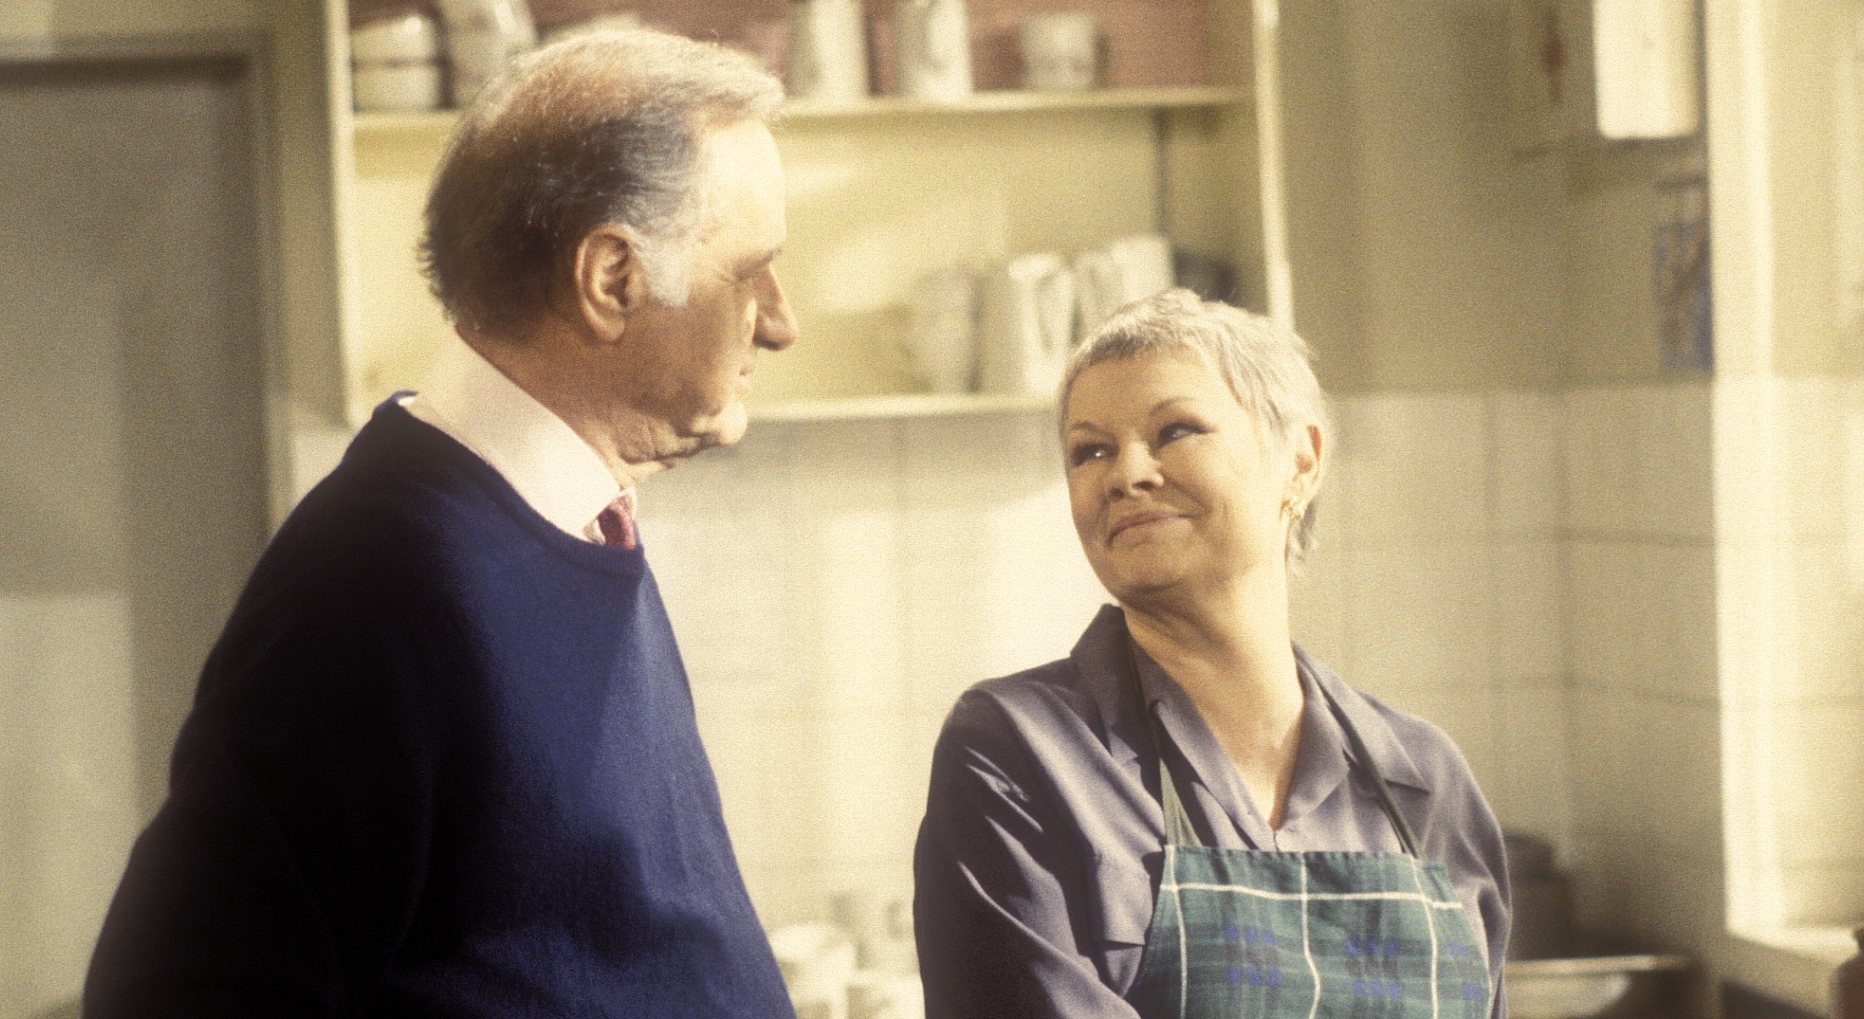 Judi Dench and Geoffrey Palmer in "As Time Goes By". (Photo: BBC)